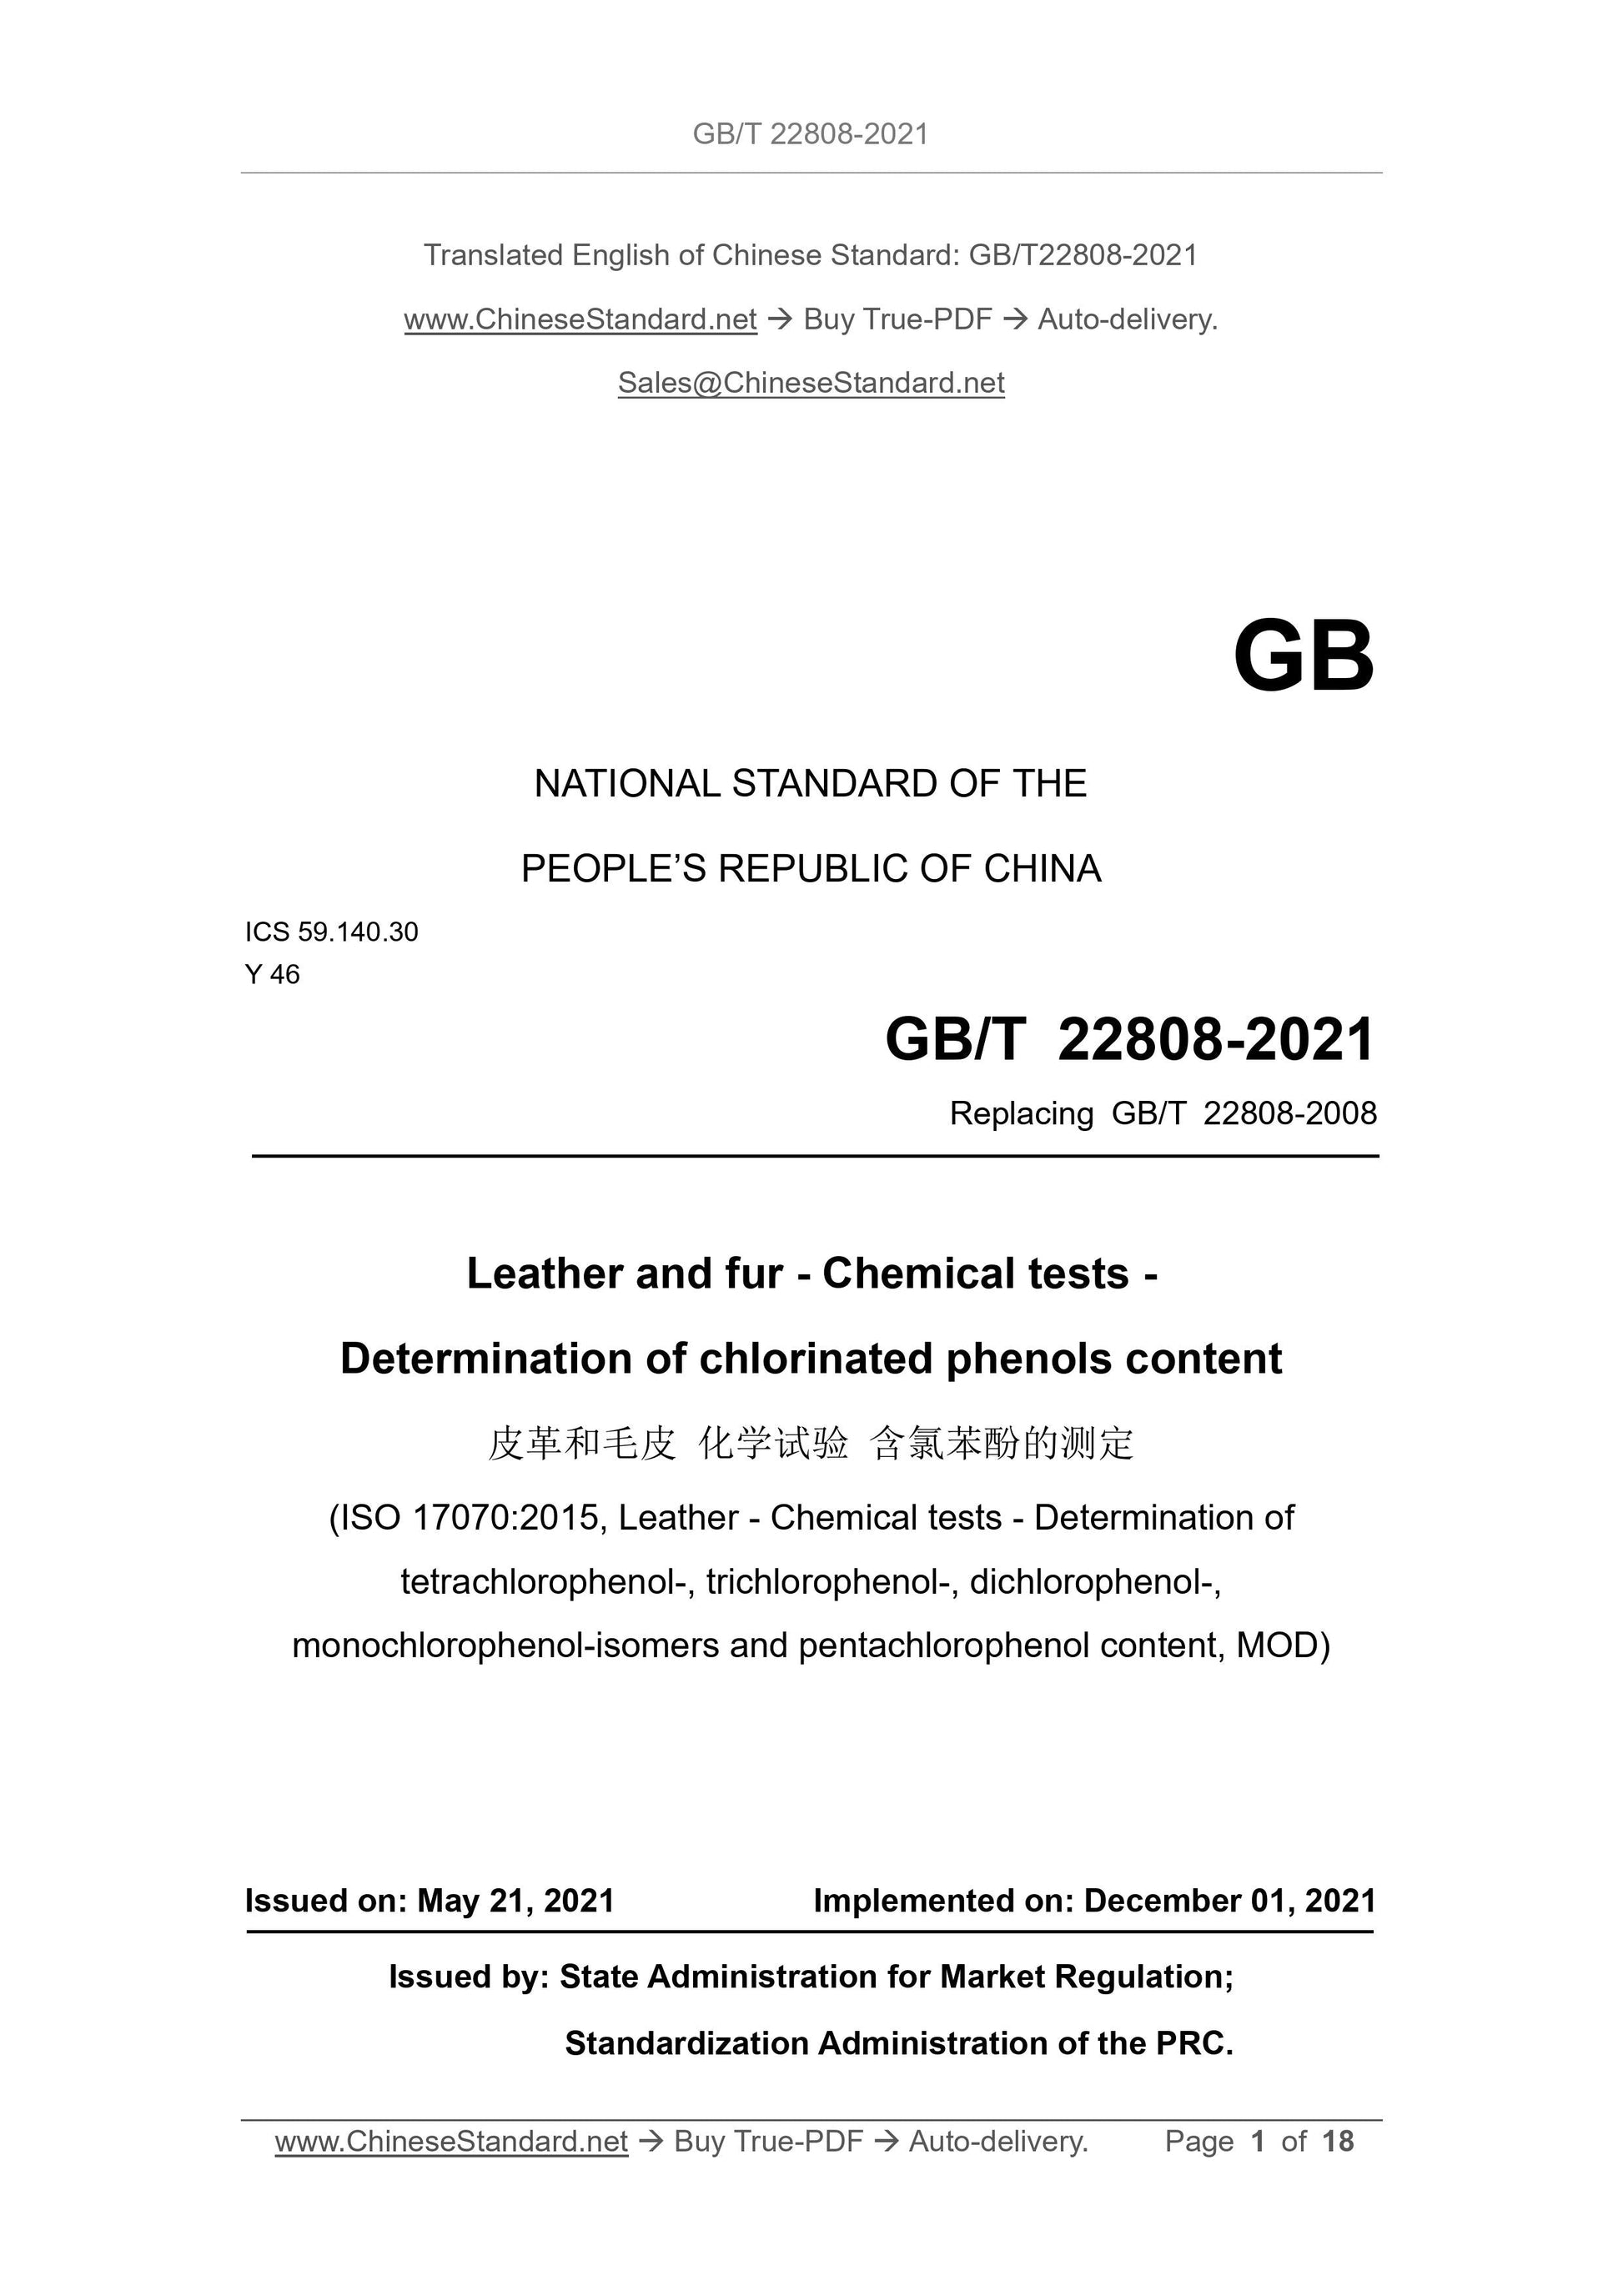 GB/T 22808-2021 Page 1